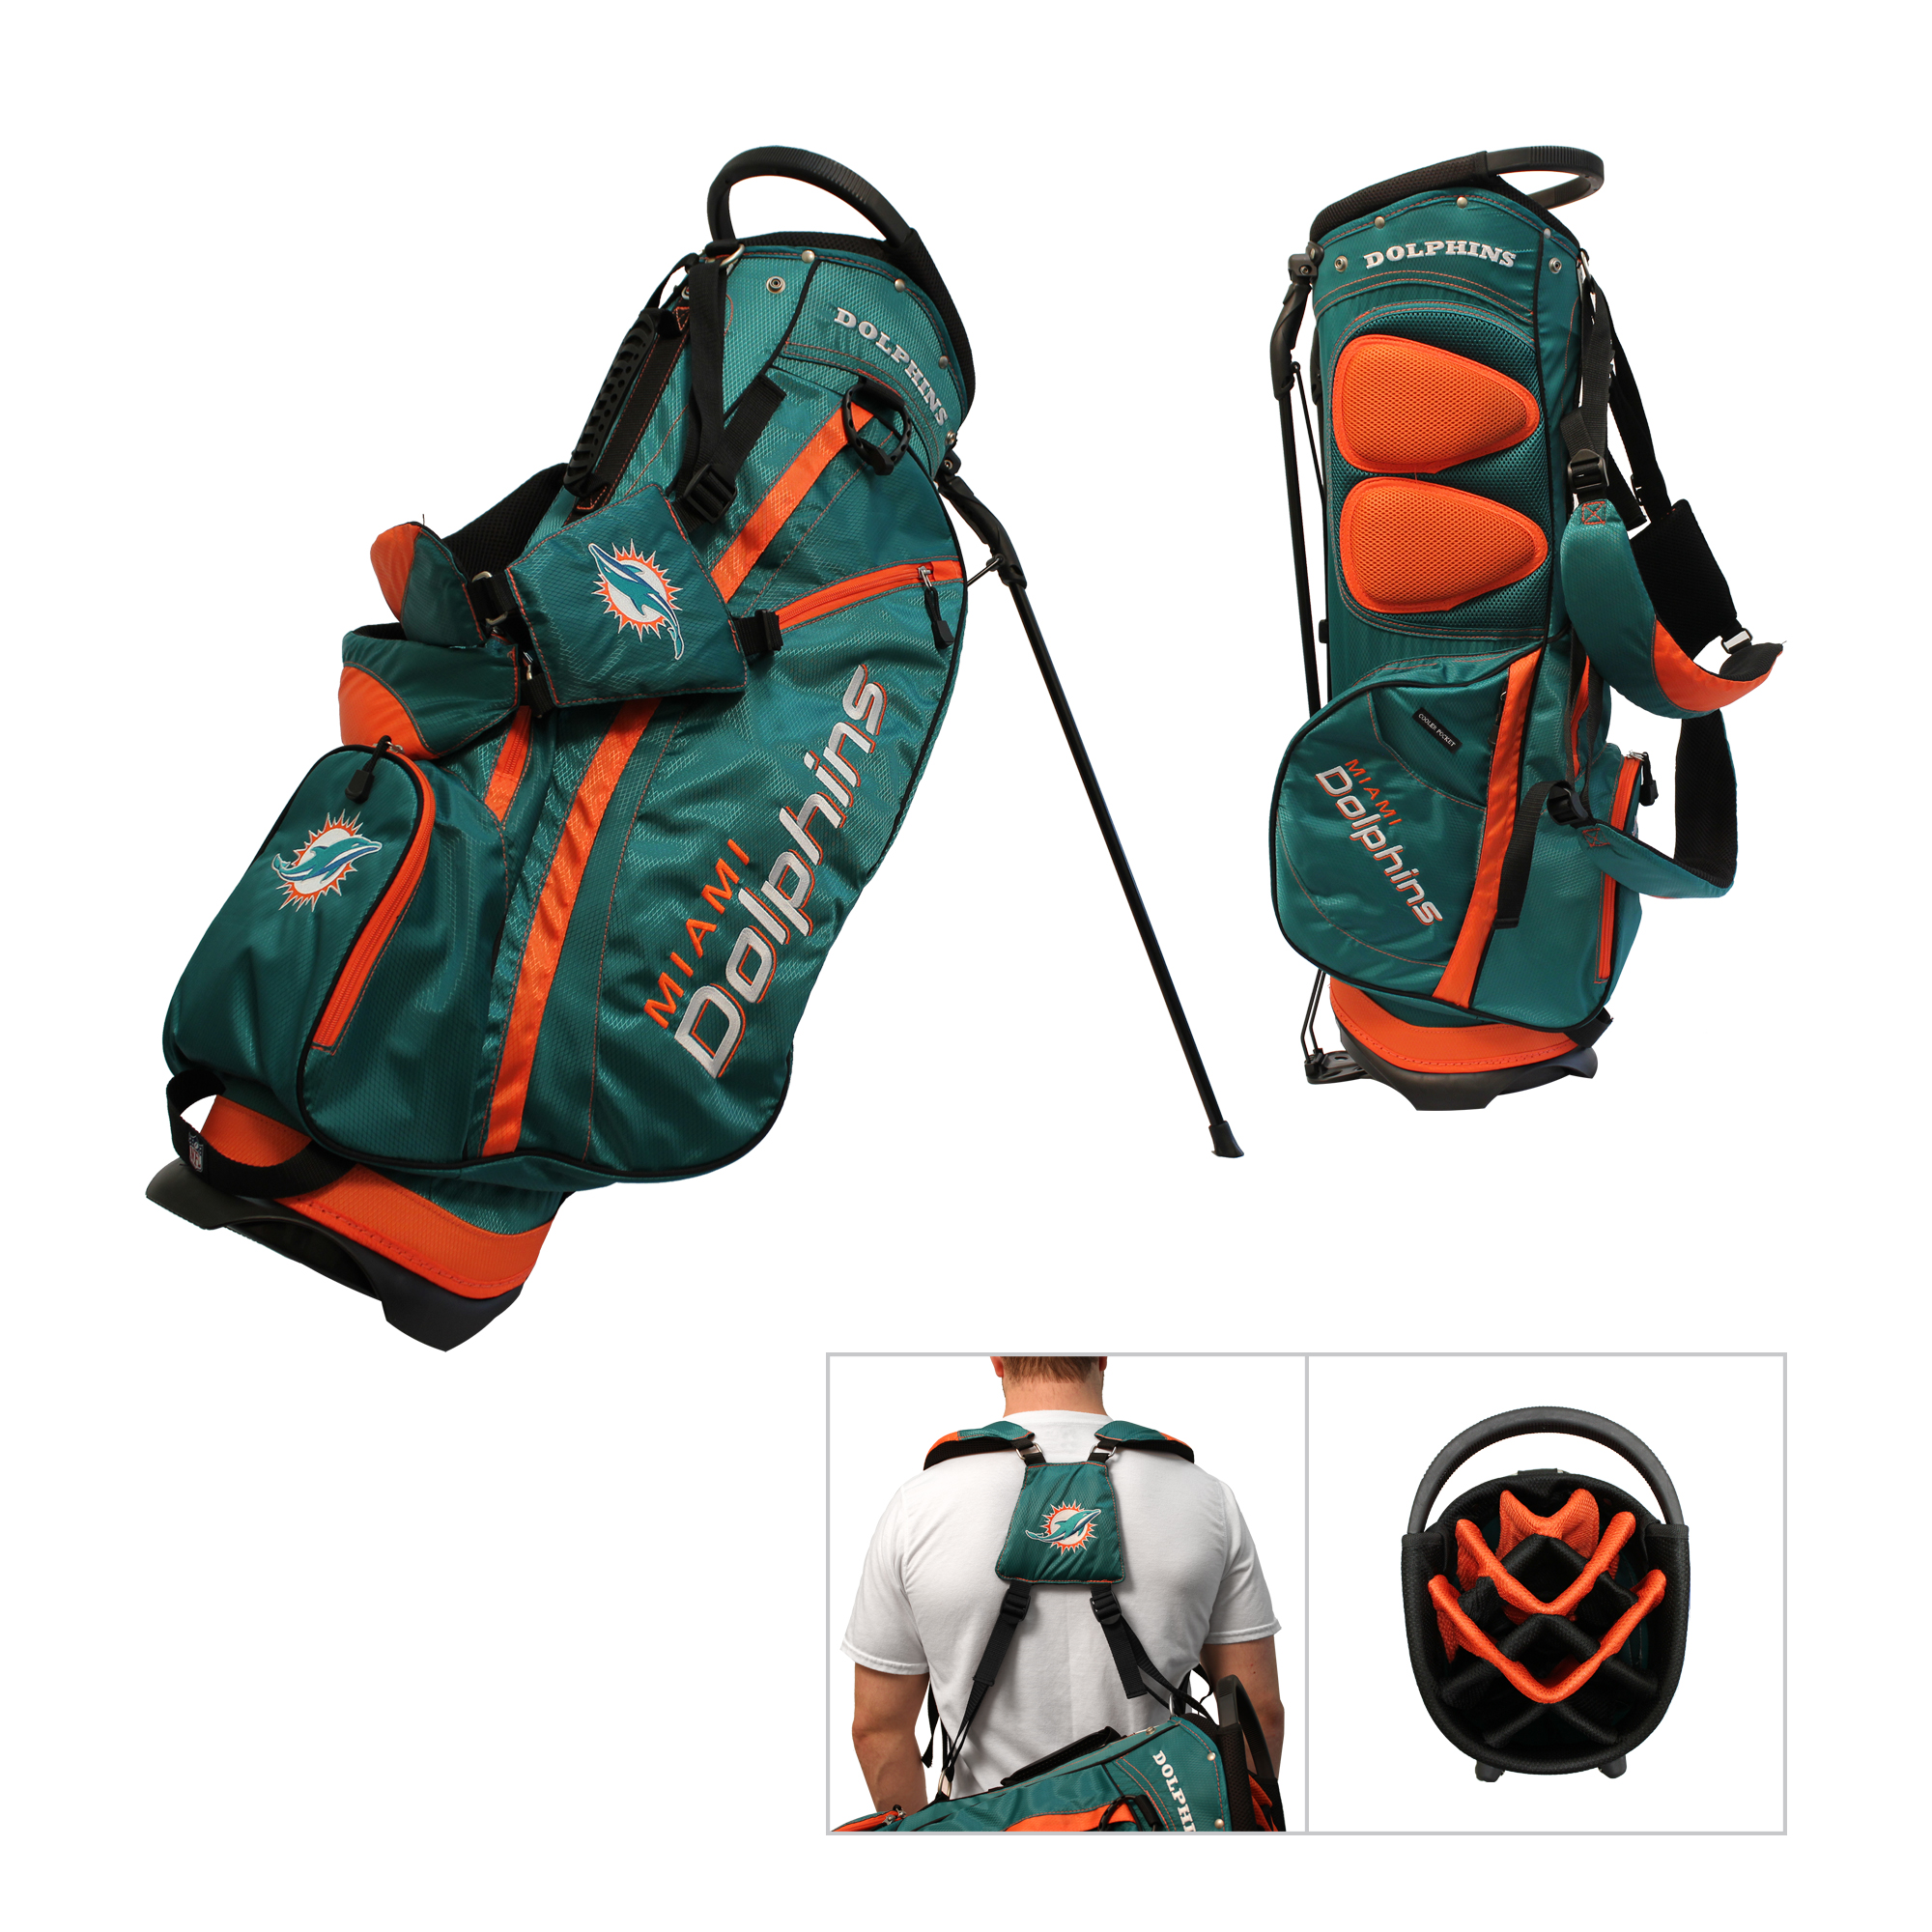 Miami Dolphins Fairway Stand Bag